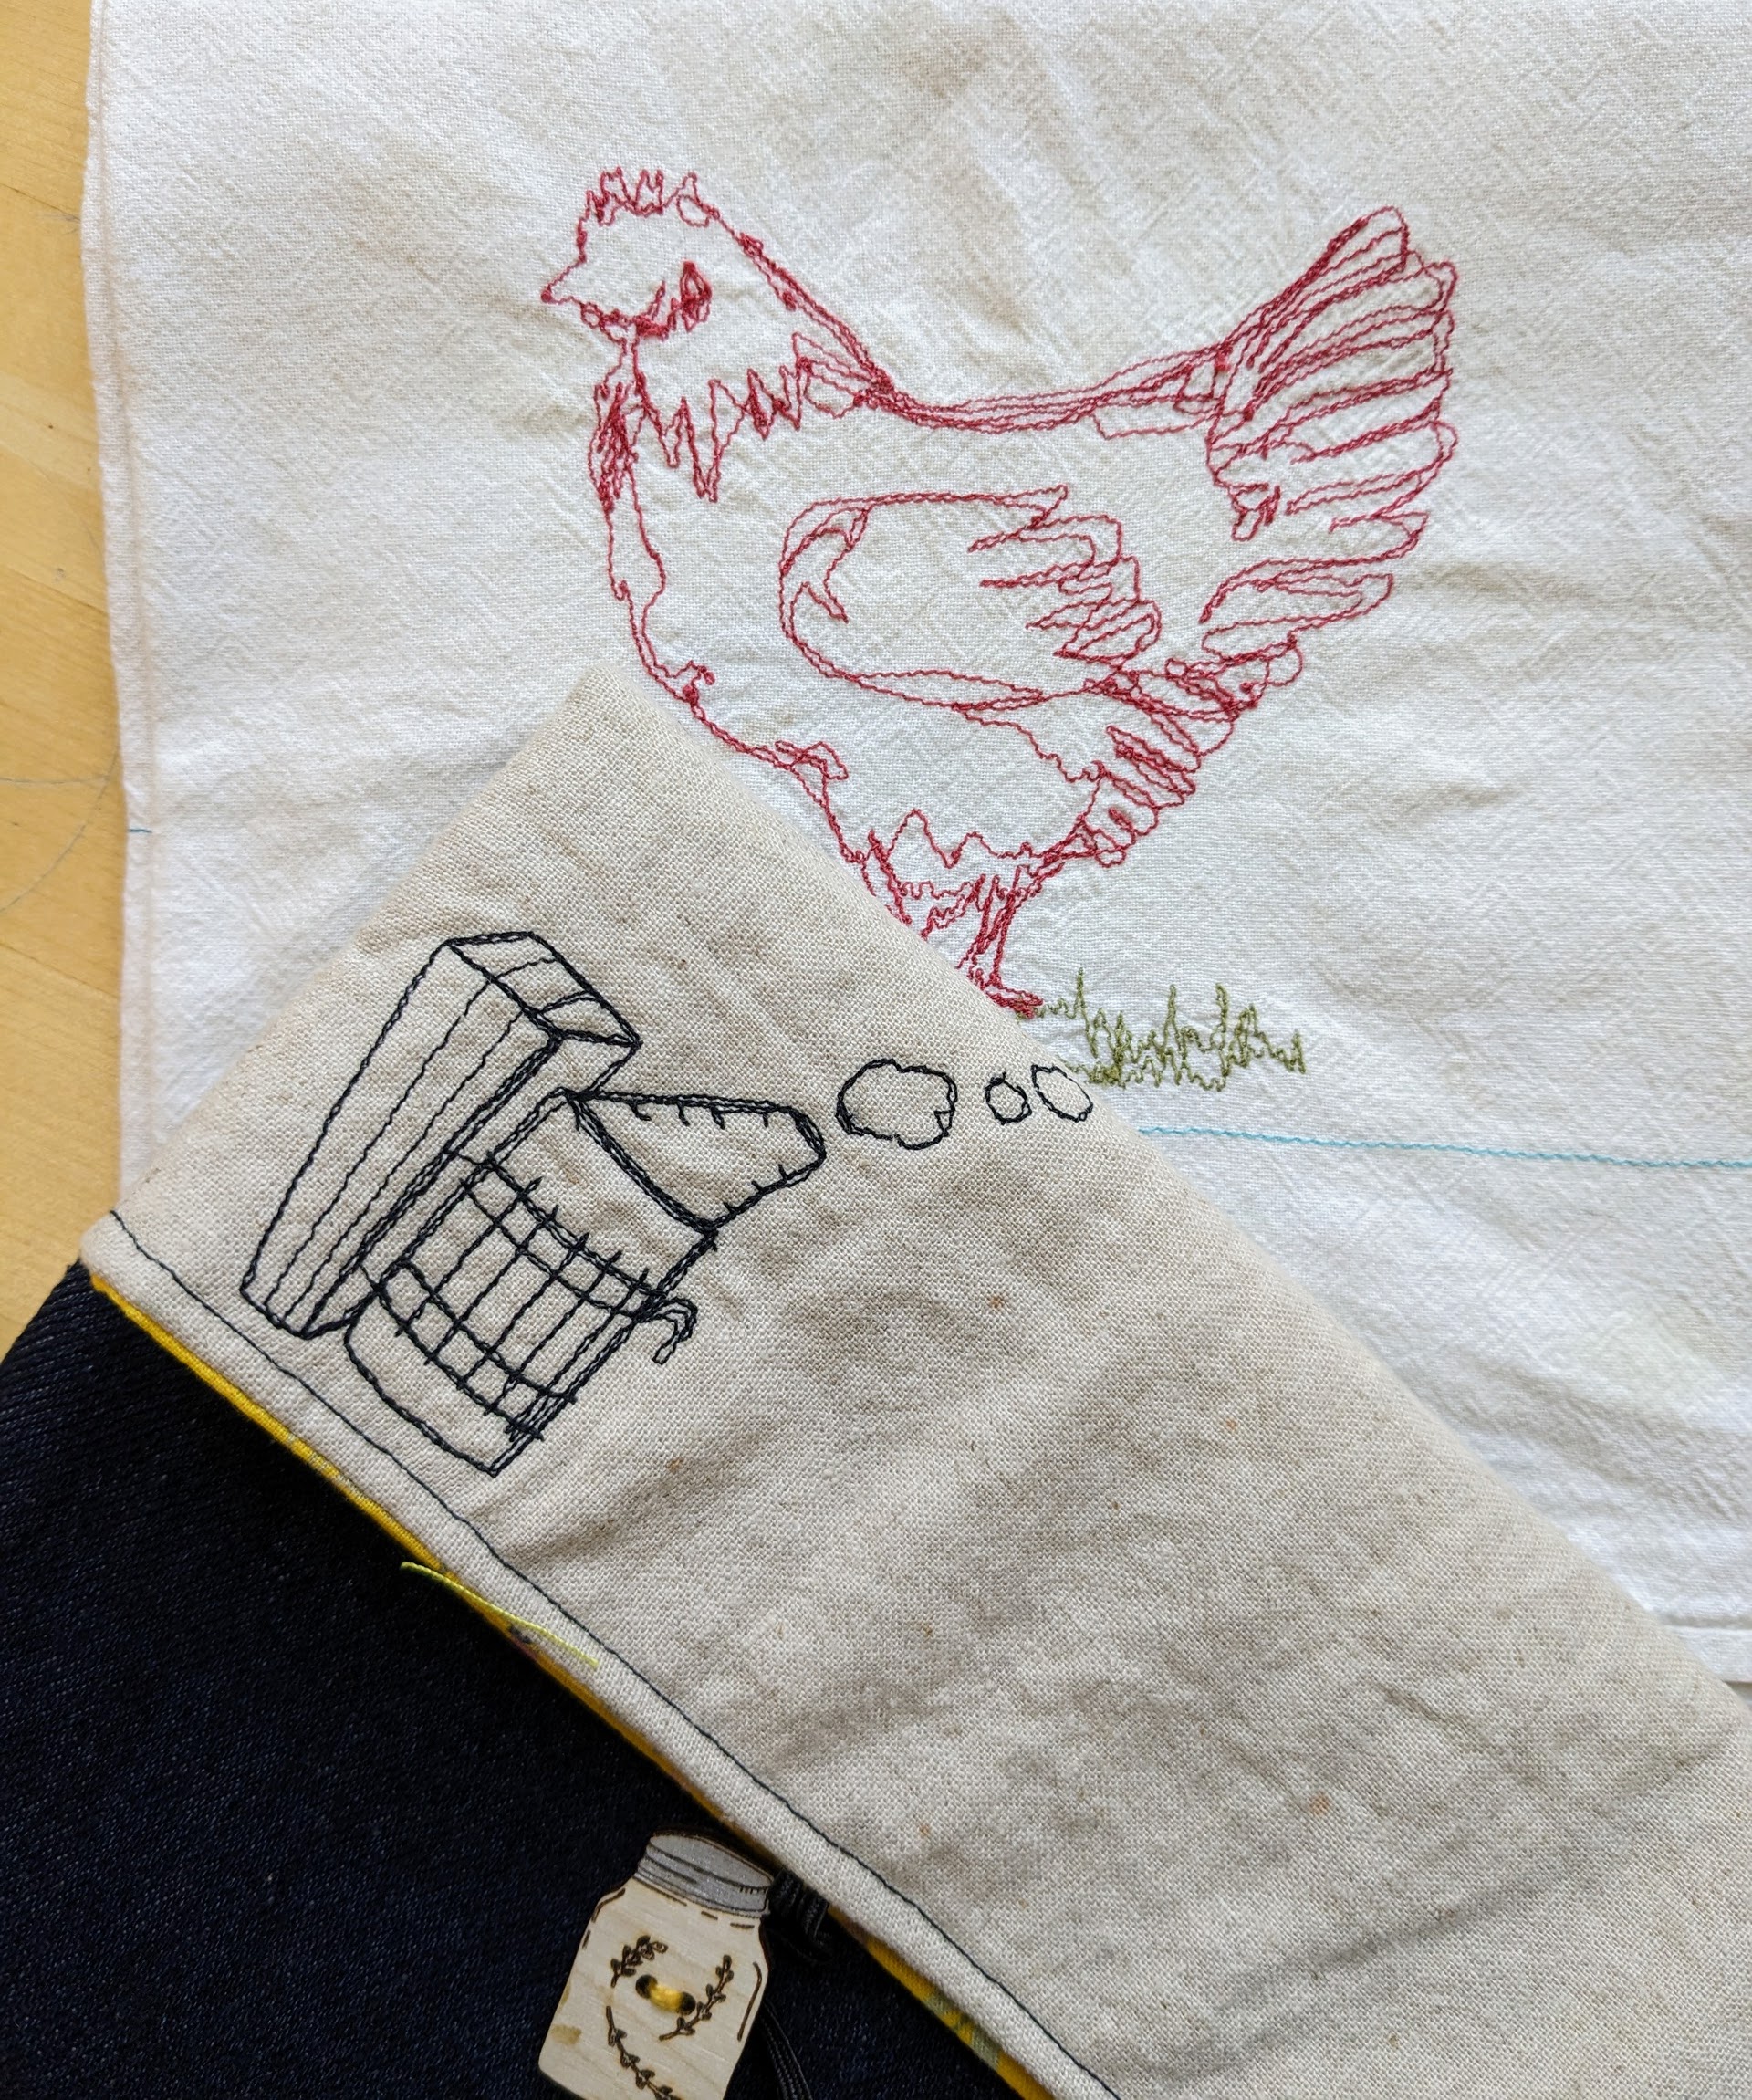 Hen and bee smoker drawings stitched onto fabric with a sewing machine.